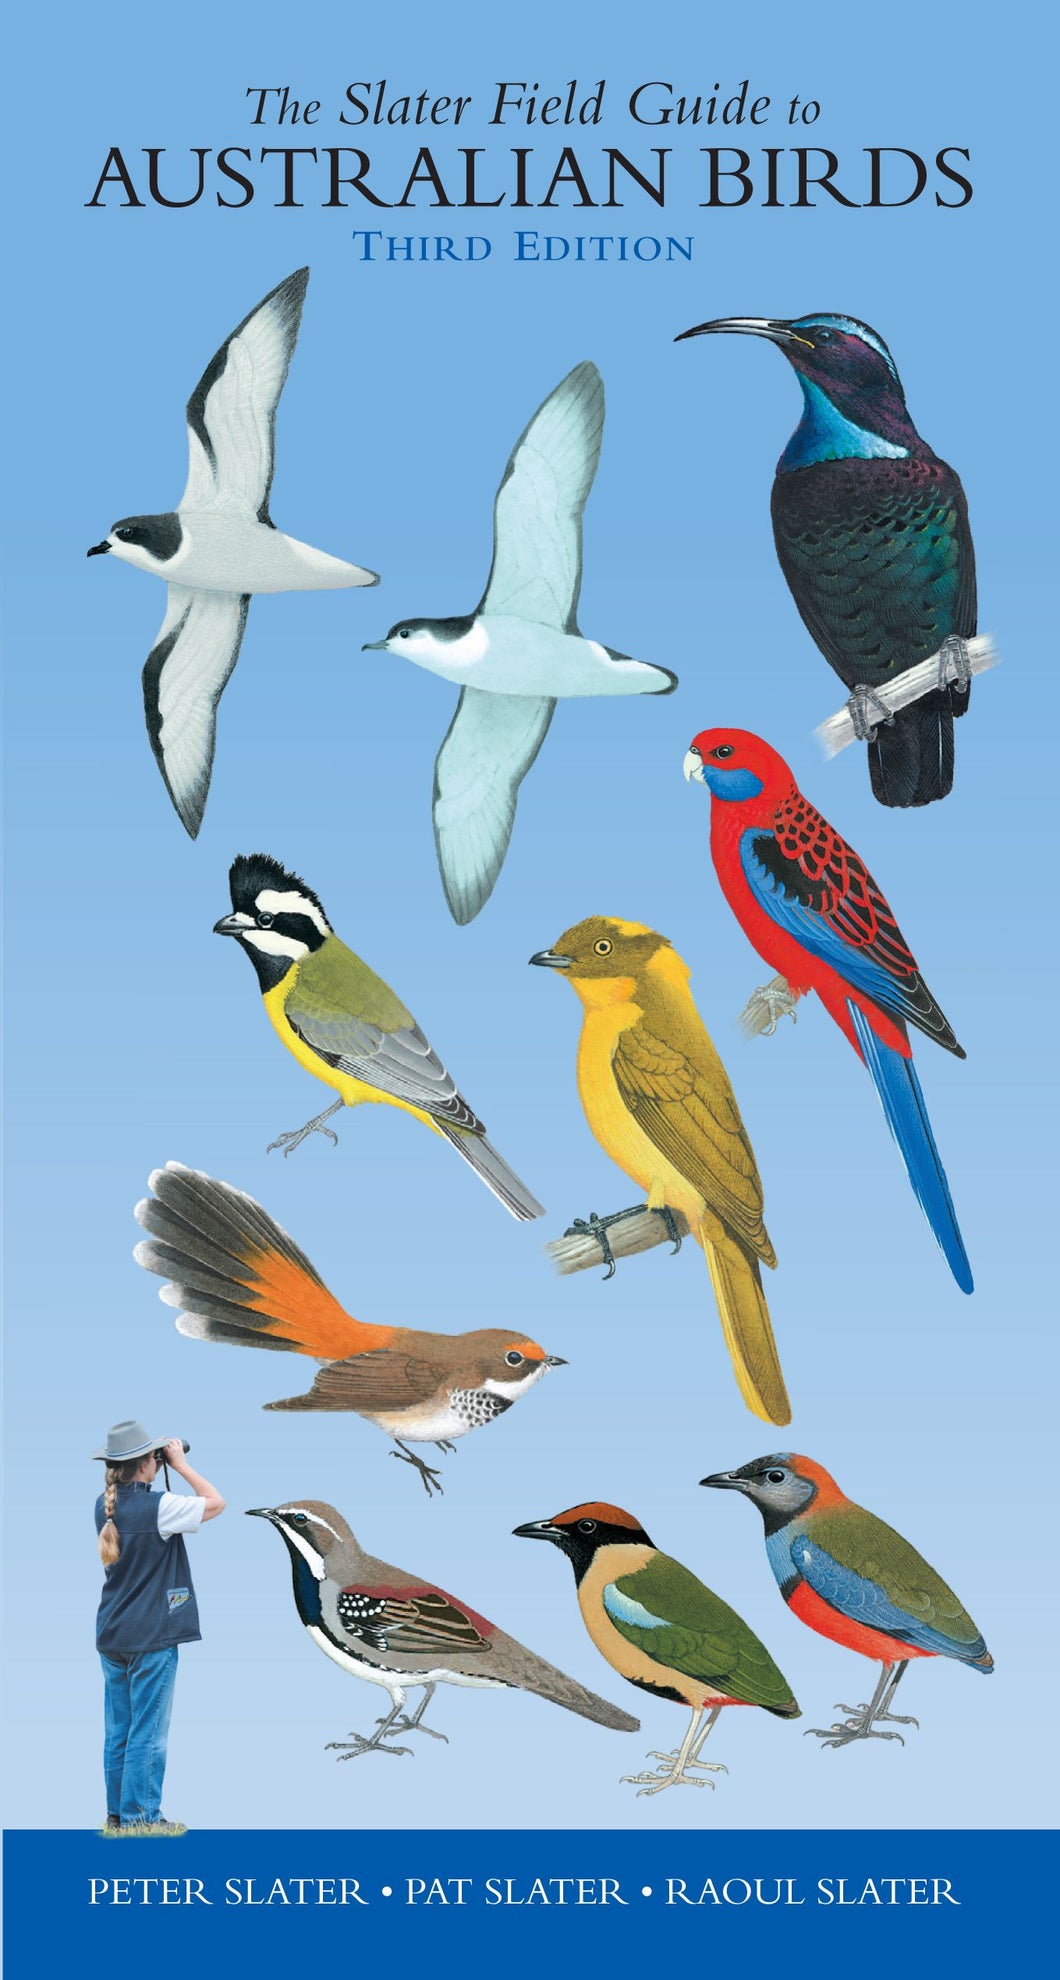 Illustrations of various colourful birds.